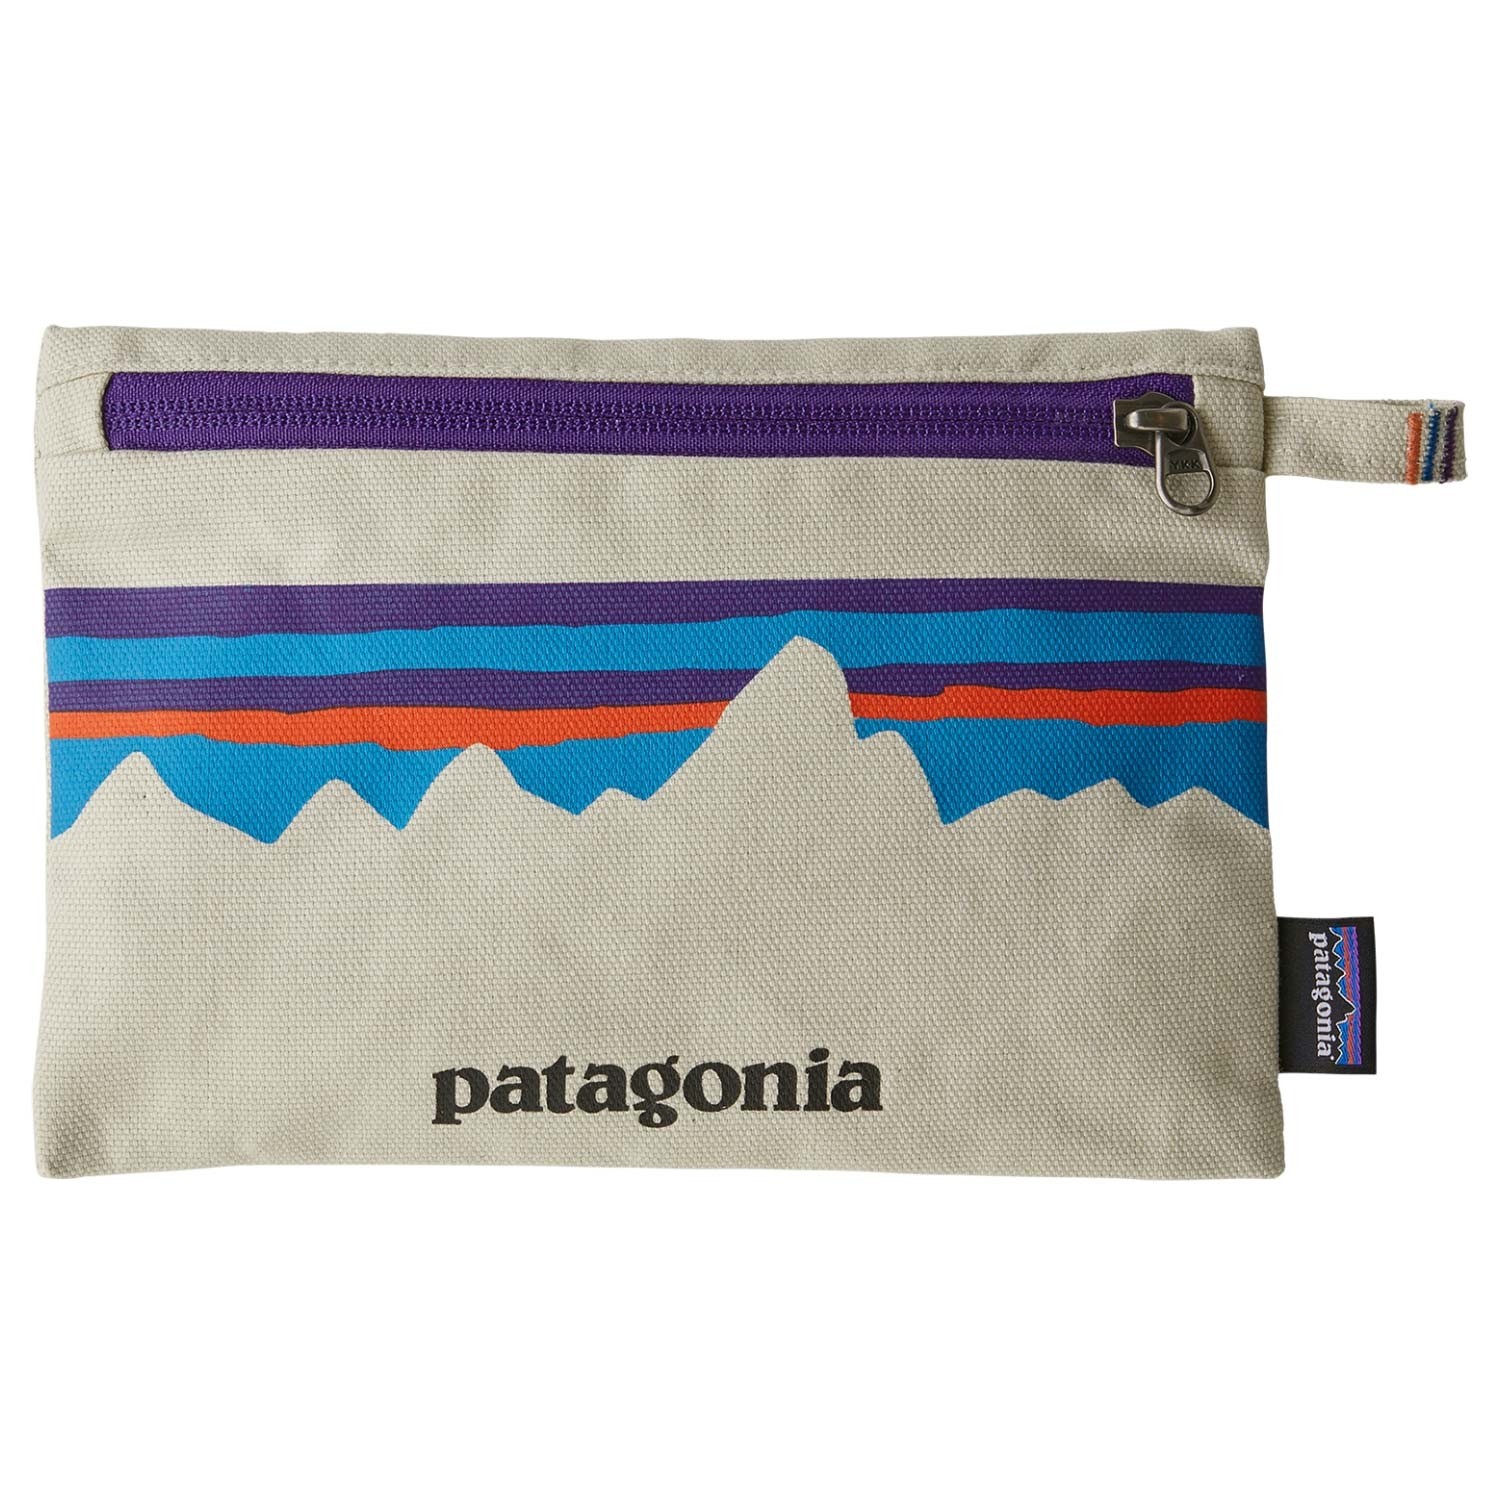 Patagonia Zippered Pouch - P6 Fitz Roy: Bleached Stone